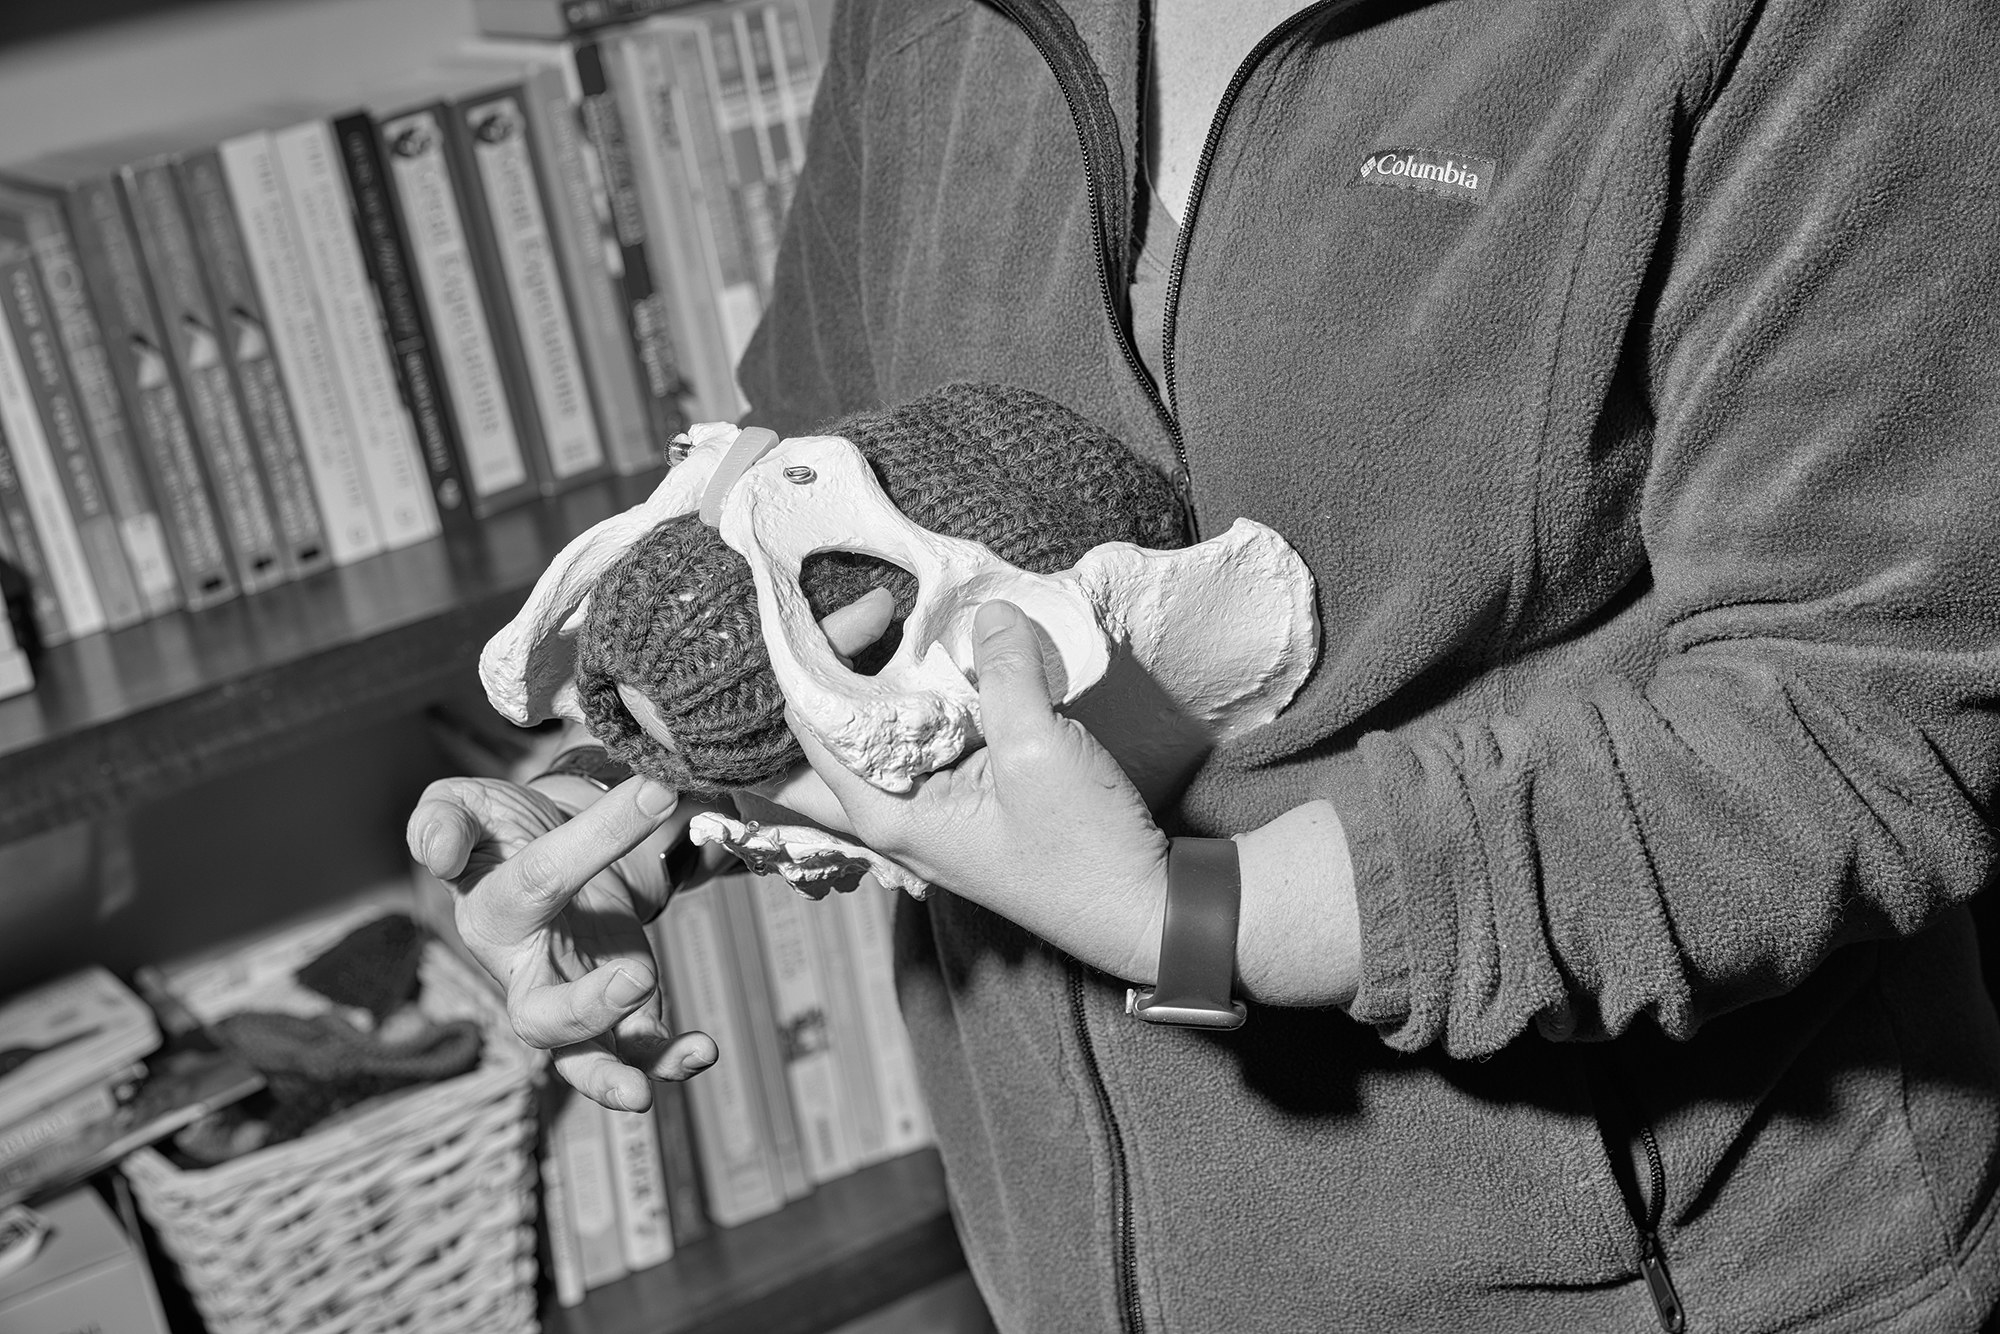 A woman holds a model with a pelvis and a knit hat to represent birth